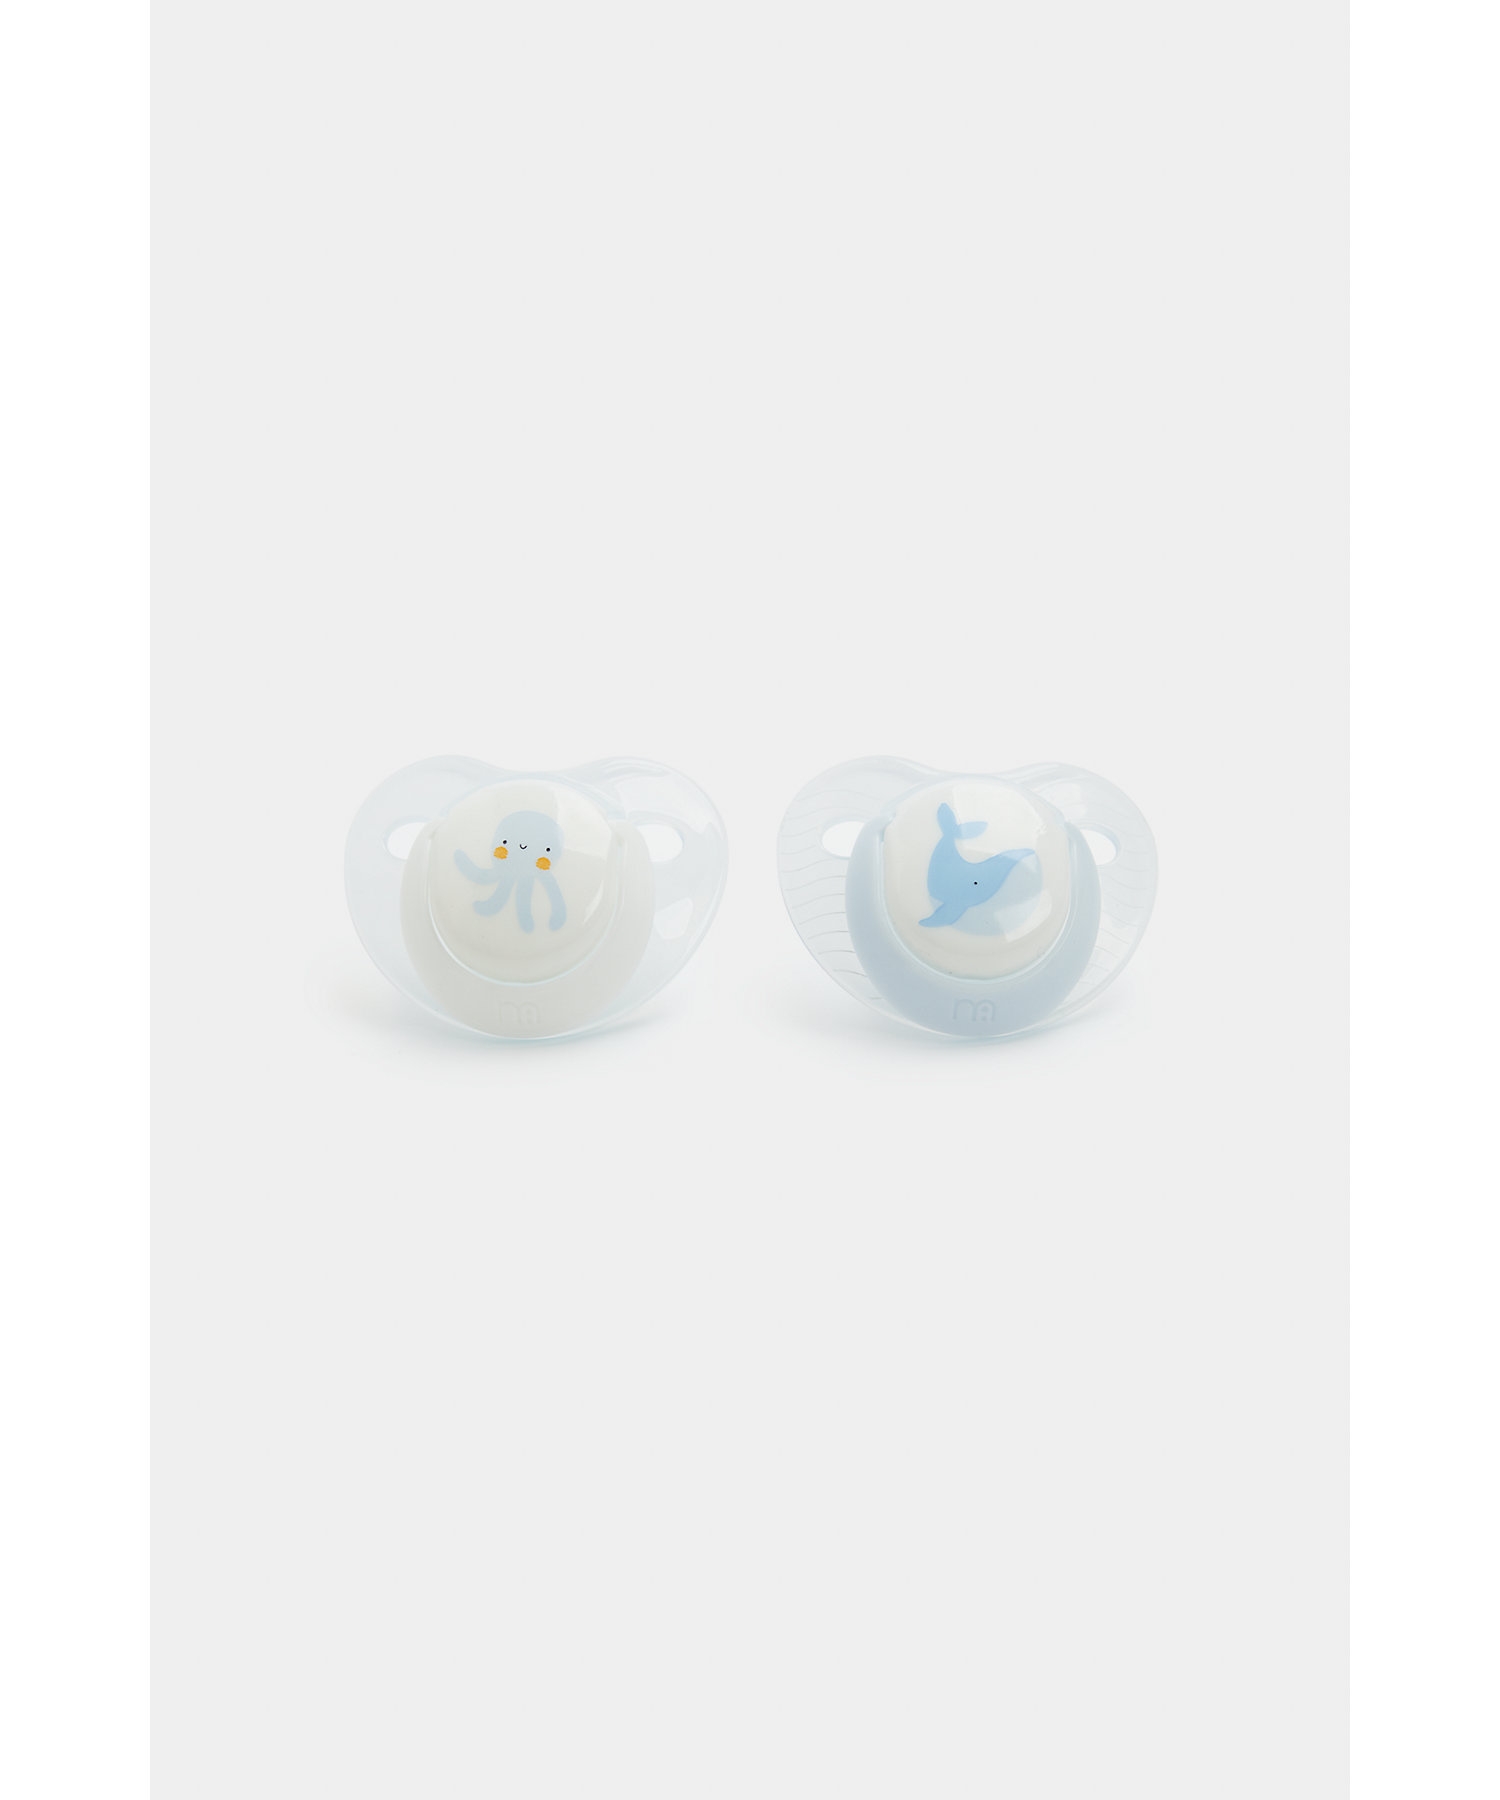 Mothercare | Mothercare Octopus & Whale Soothers Blue Pack of 2 0